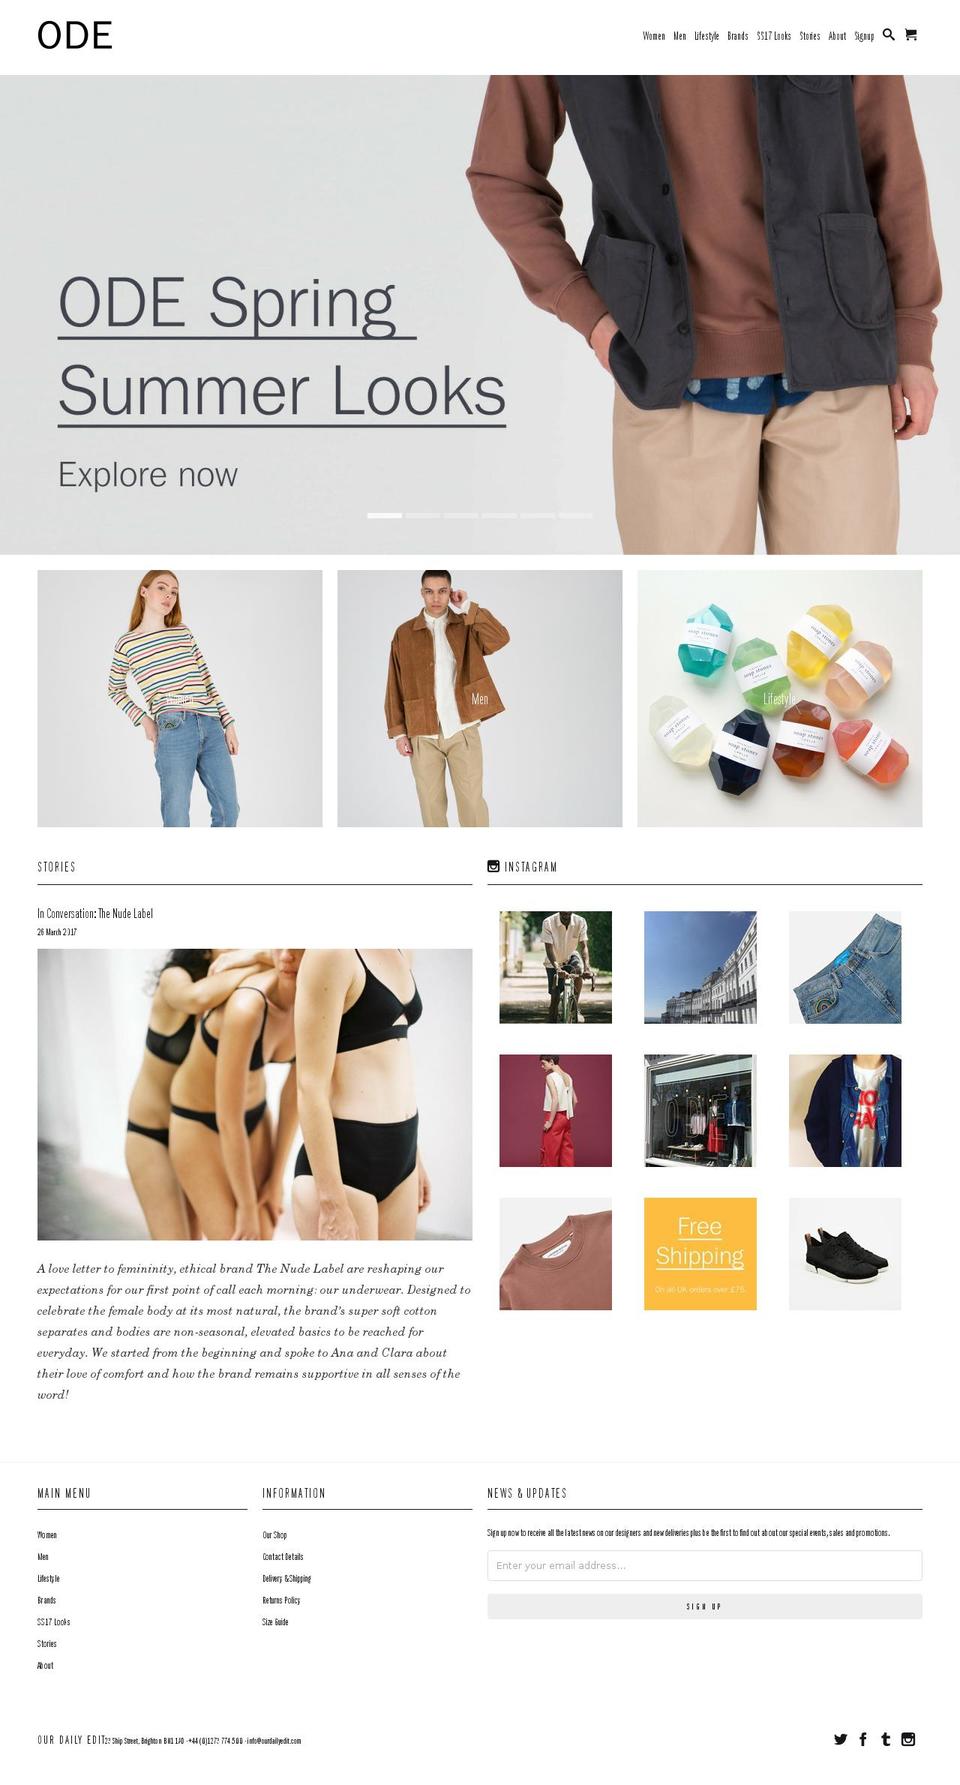 Streamline Shopify theme site example ourdailyedit.com